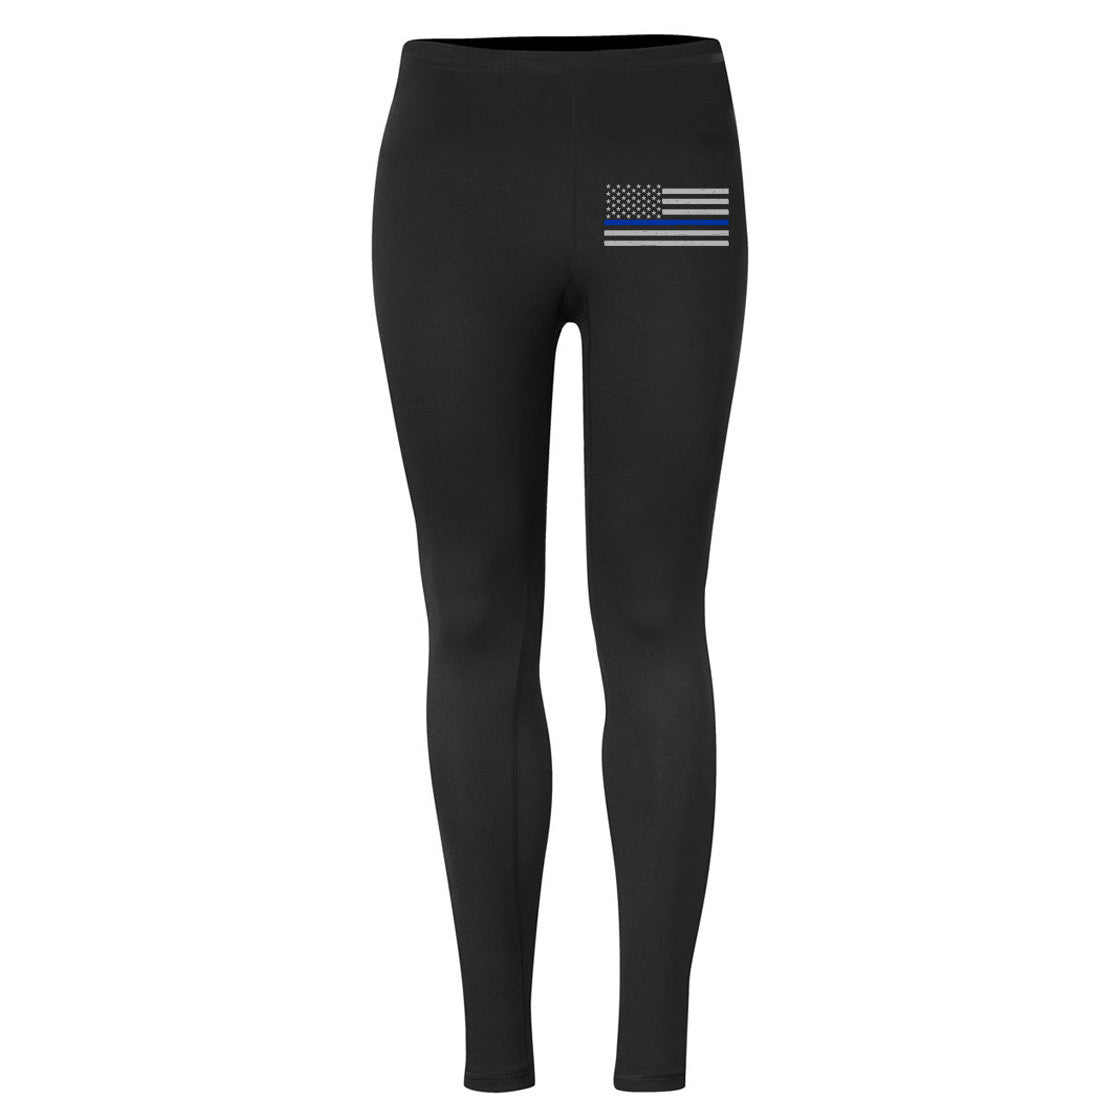 Cotton Spandex Leggings for women - selaie.com: The Ultimate Destination  for Women's Undergarments & Leading Women's Clothing Brand in Bangladesh  Online Shopping With Home Delivery